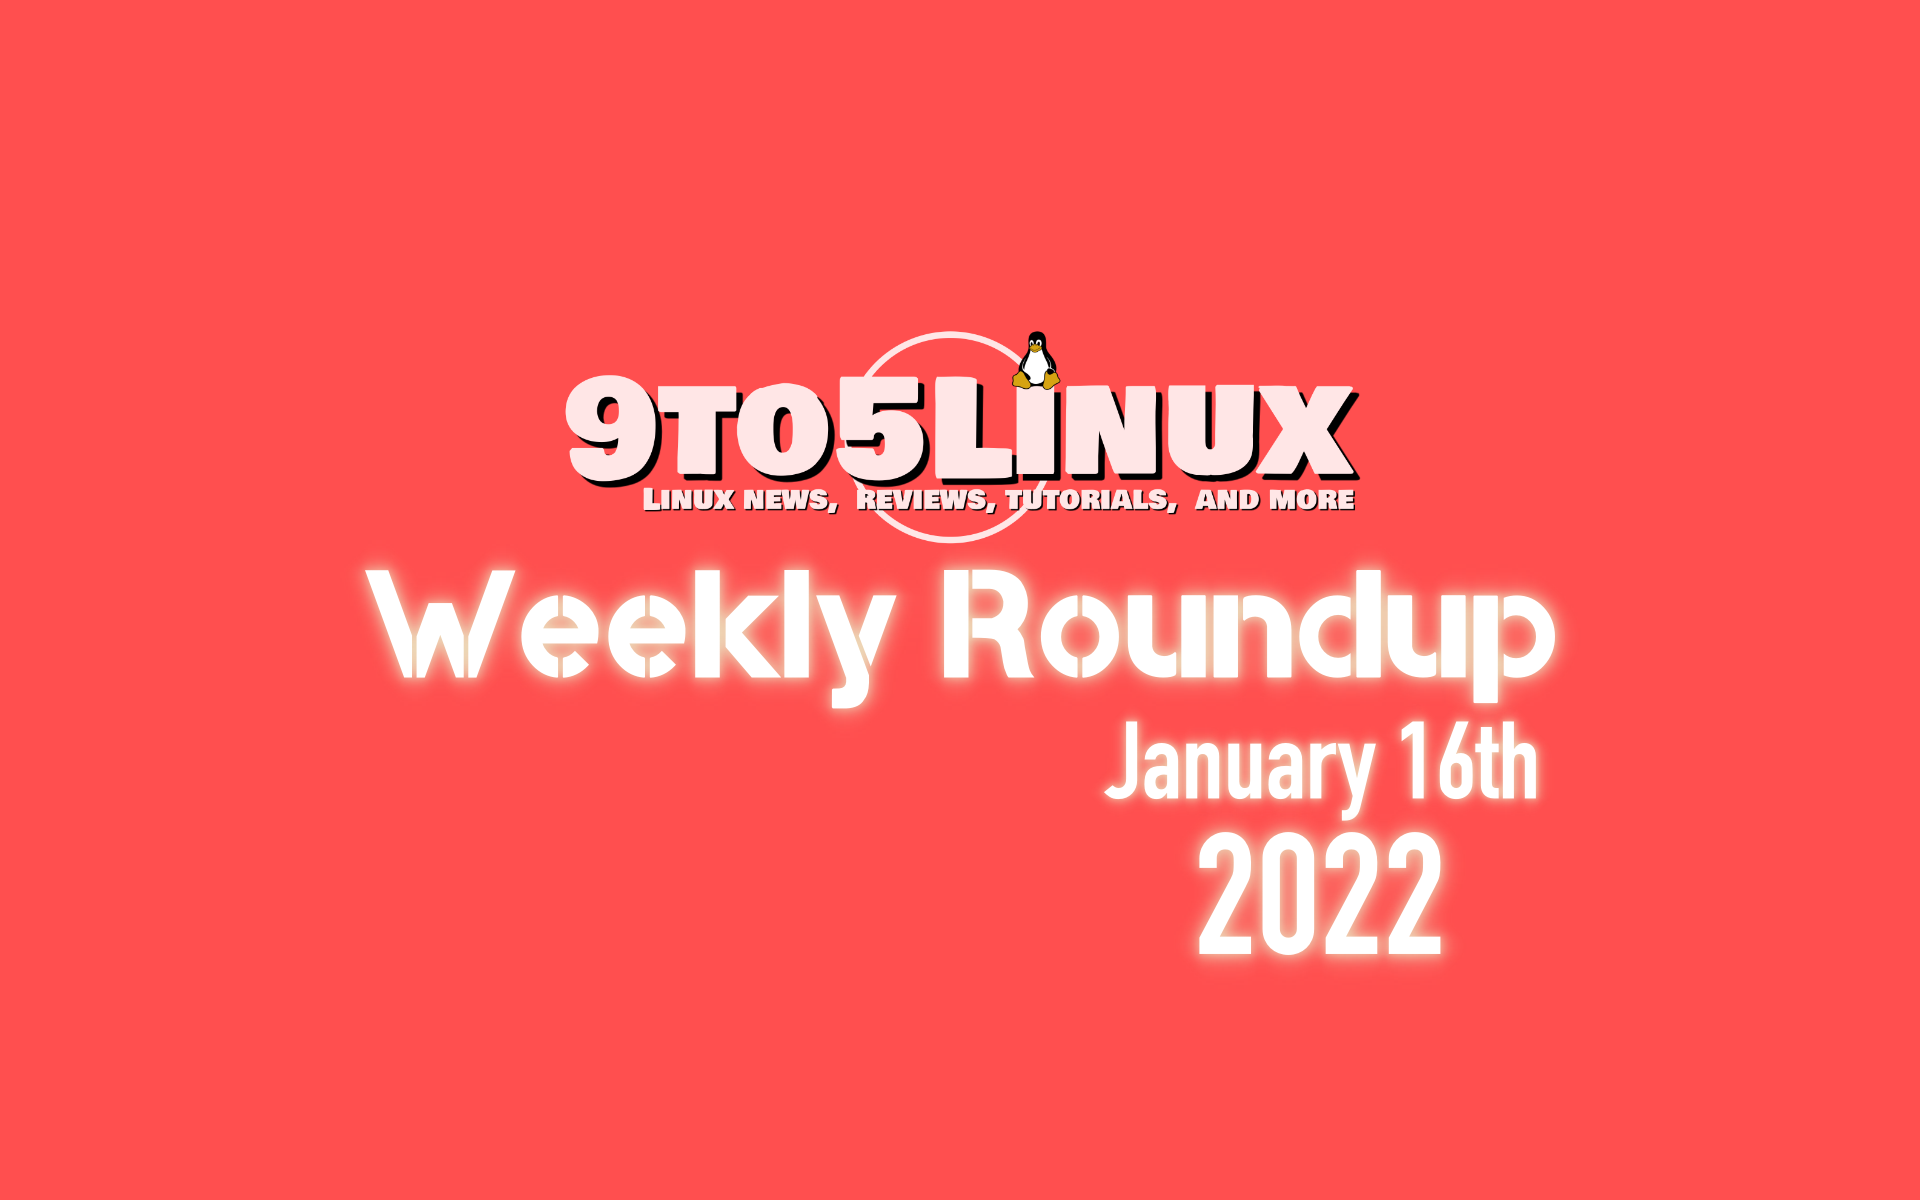 9to5Linux Weekly Roundup: January 16th, 2022